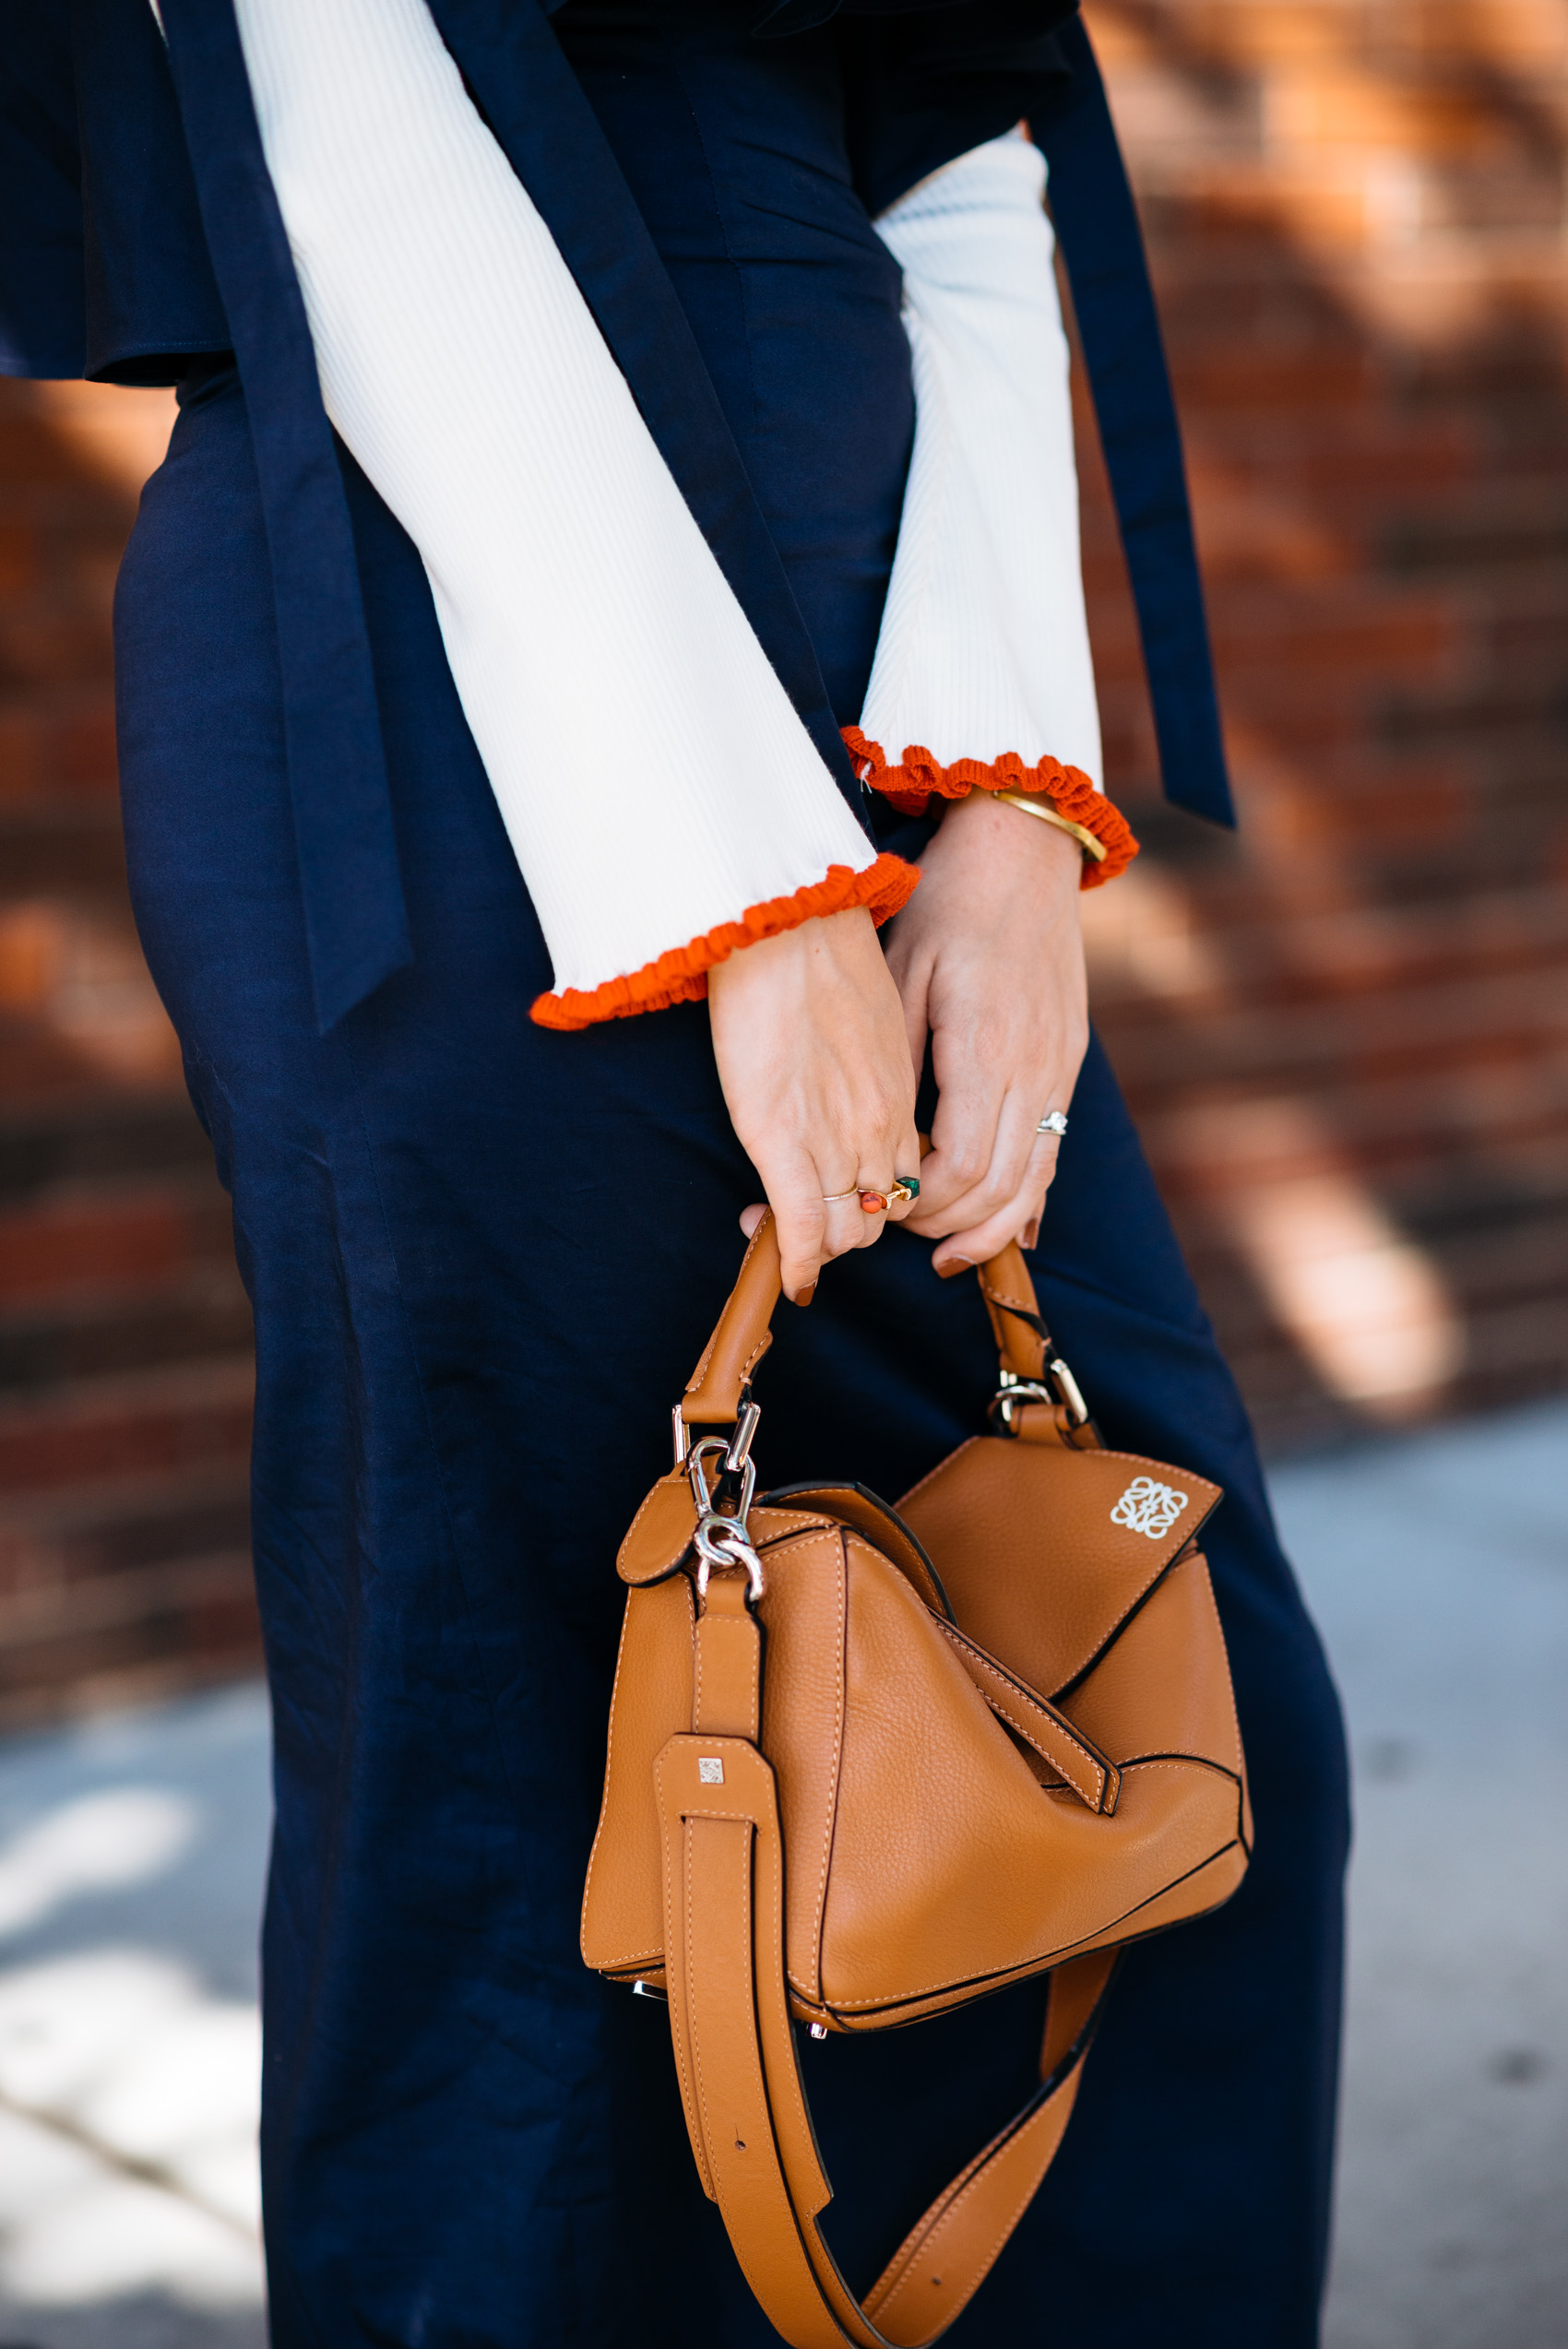 Flare sleeve details and Loewe puzzle bag in tan leather